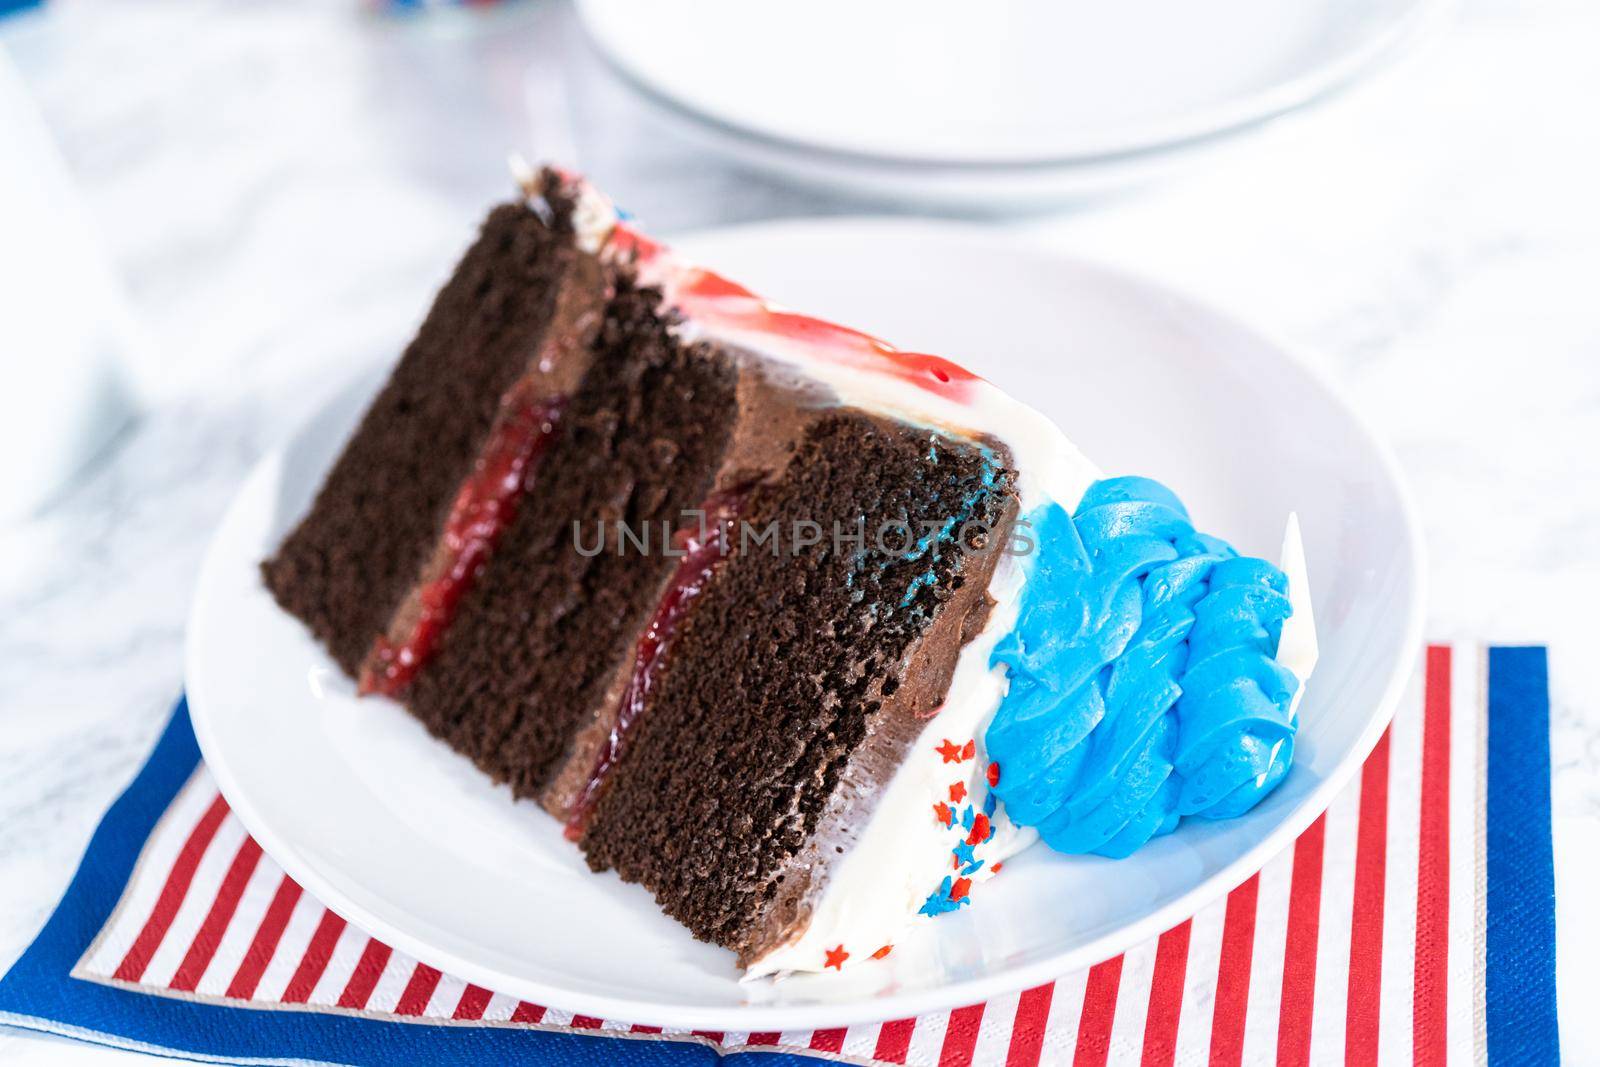 Slice of July 4th chocolate cake decorated with red, white, and blue buttercream frosting on a white plate.